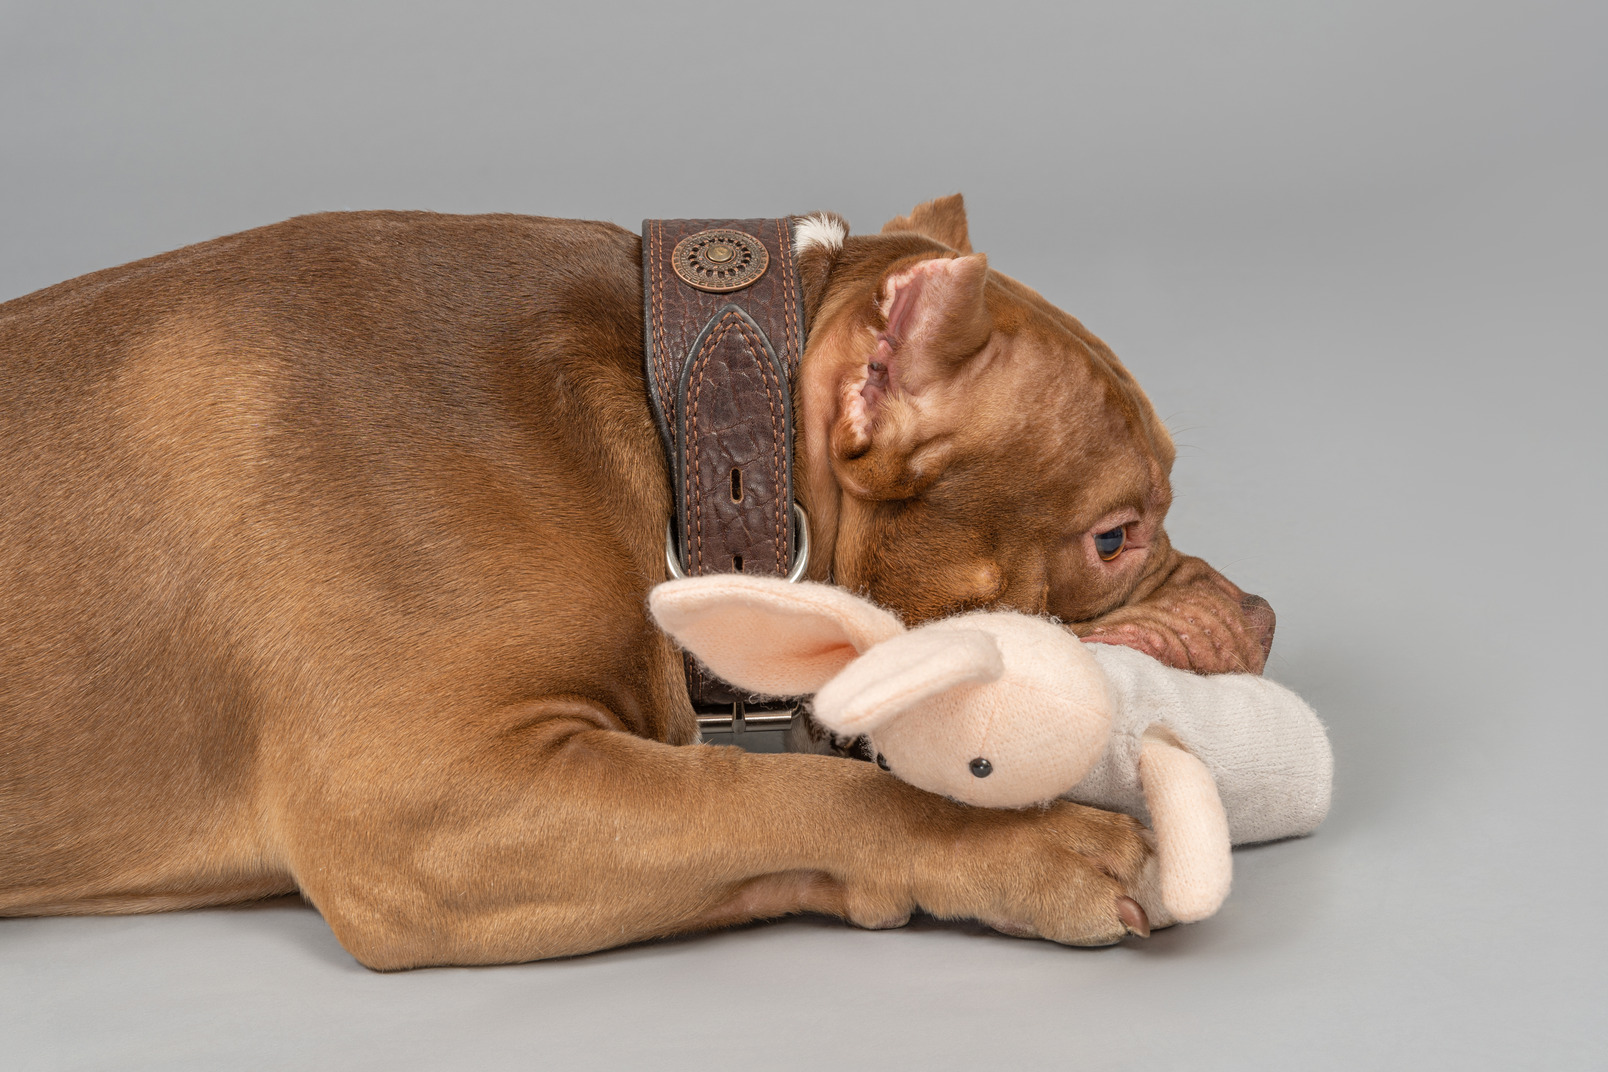 A dog is playing with a toy bunny